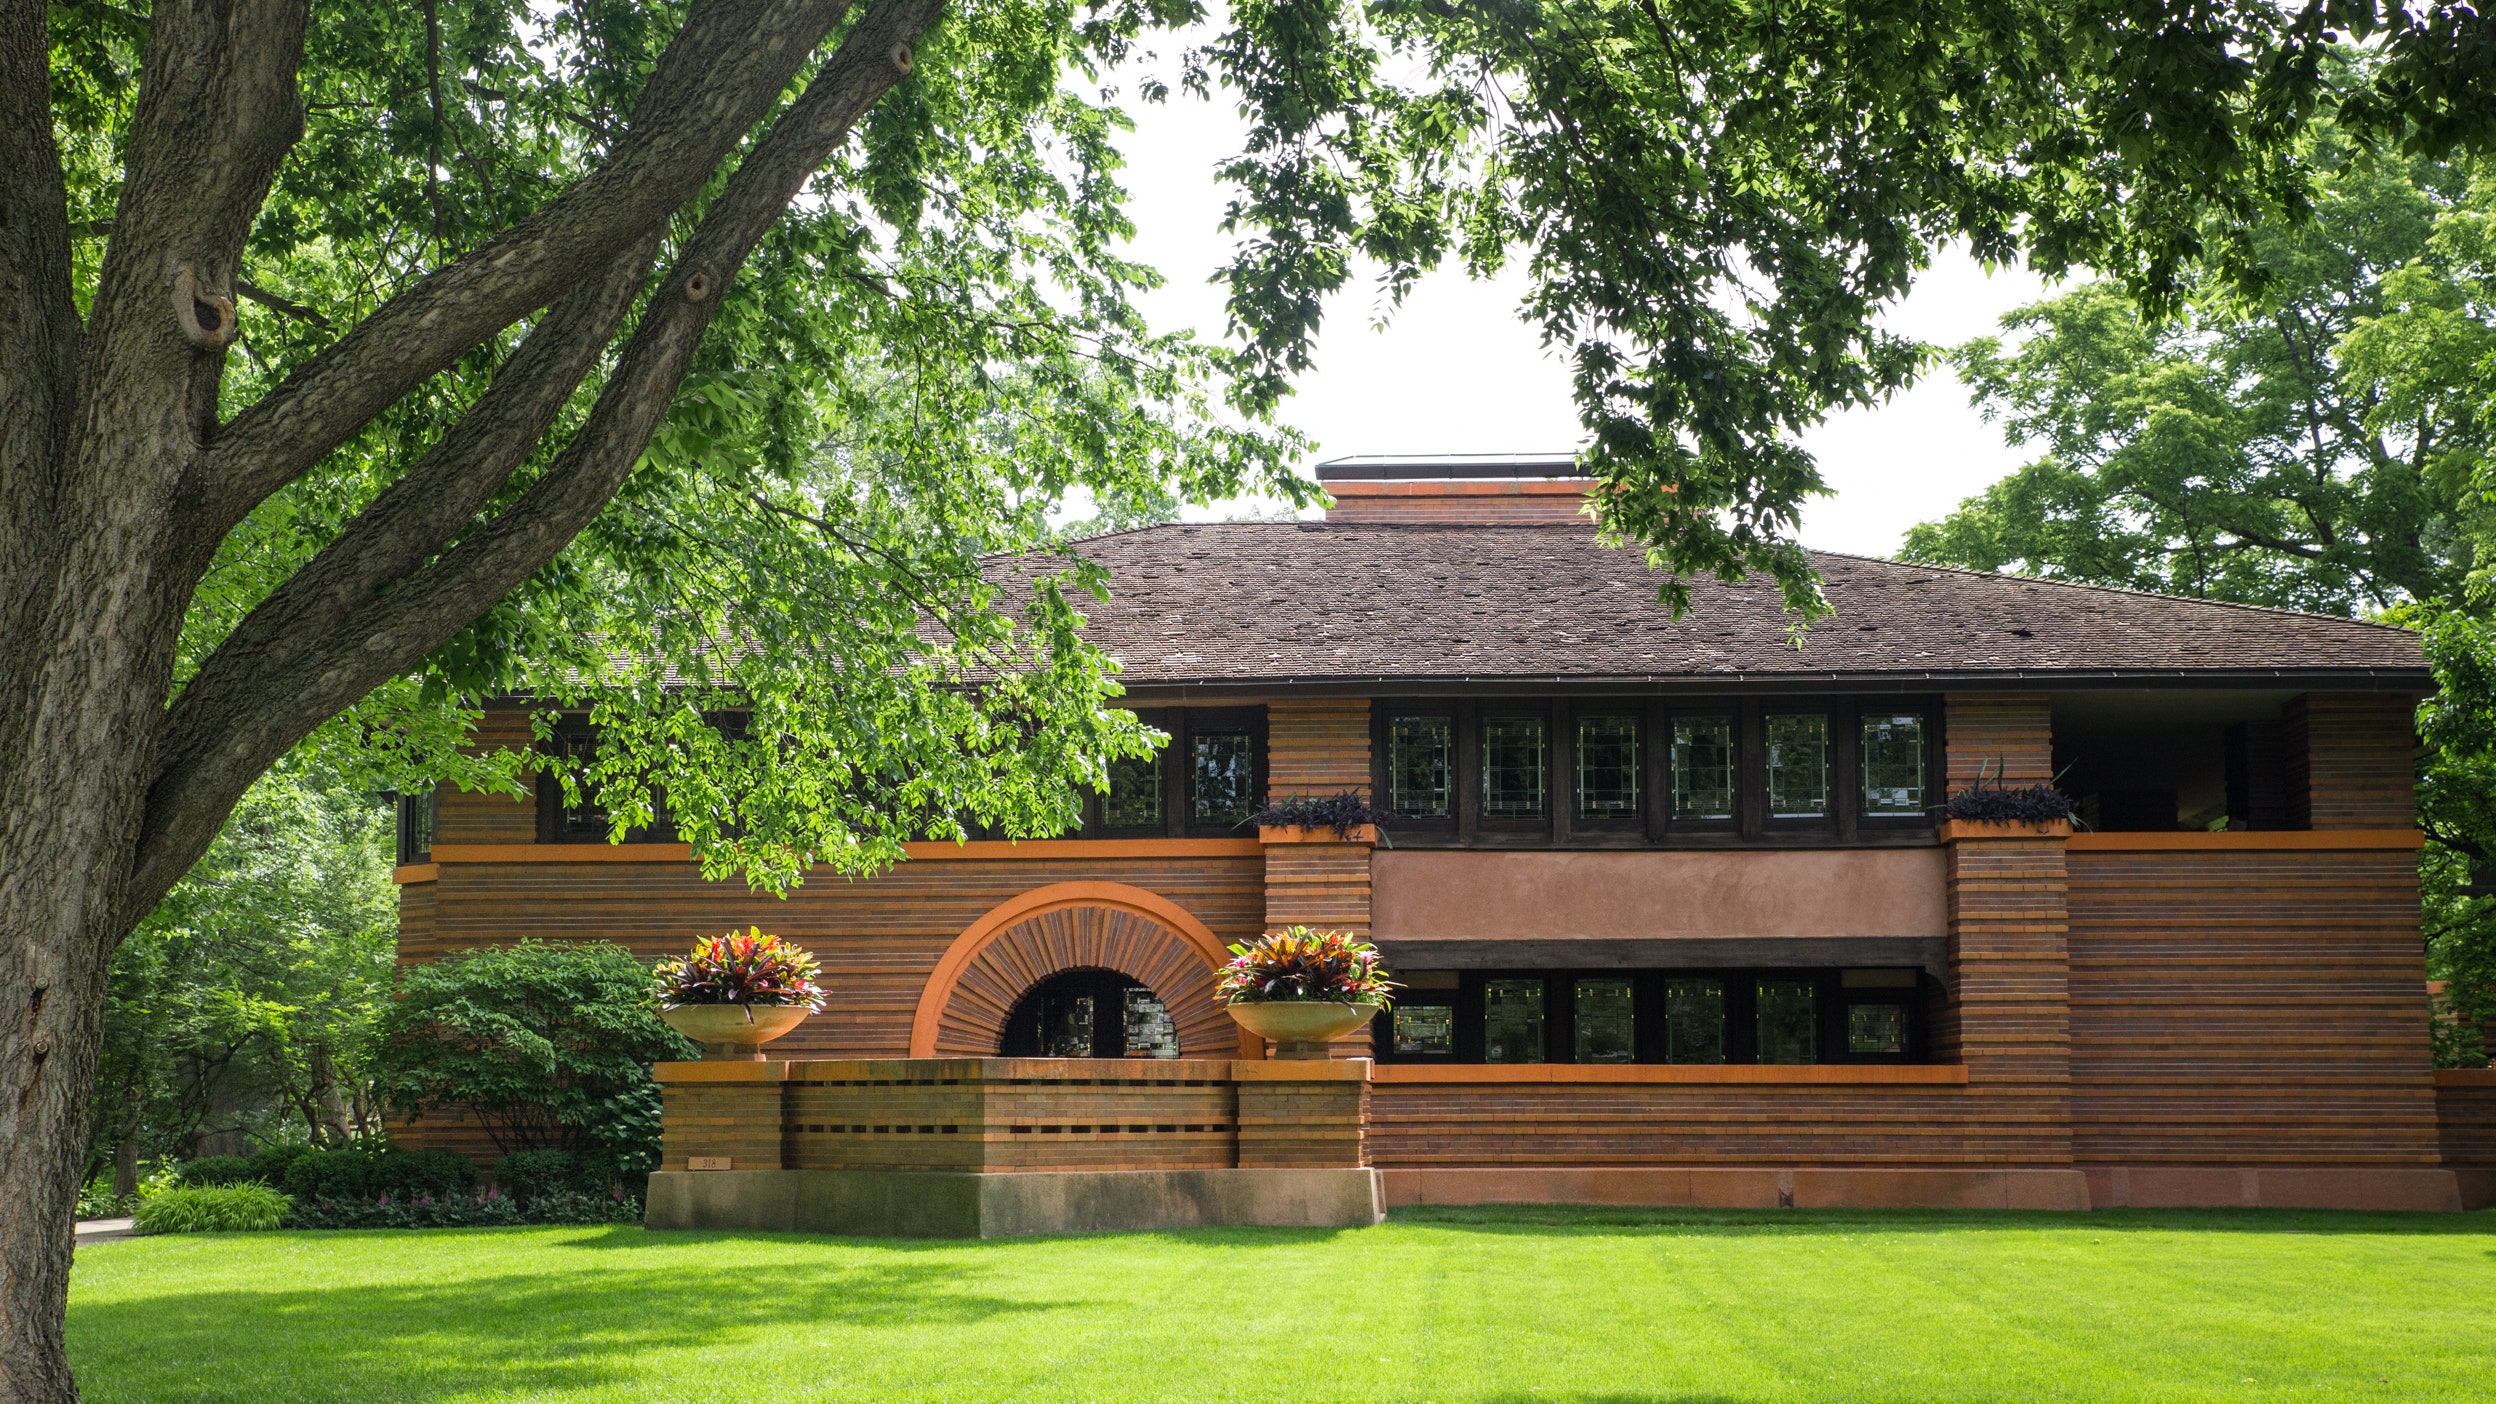 Frank Lloyd Wrights Home State Had a Surprising Significance in His Work